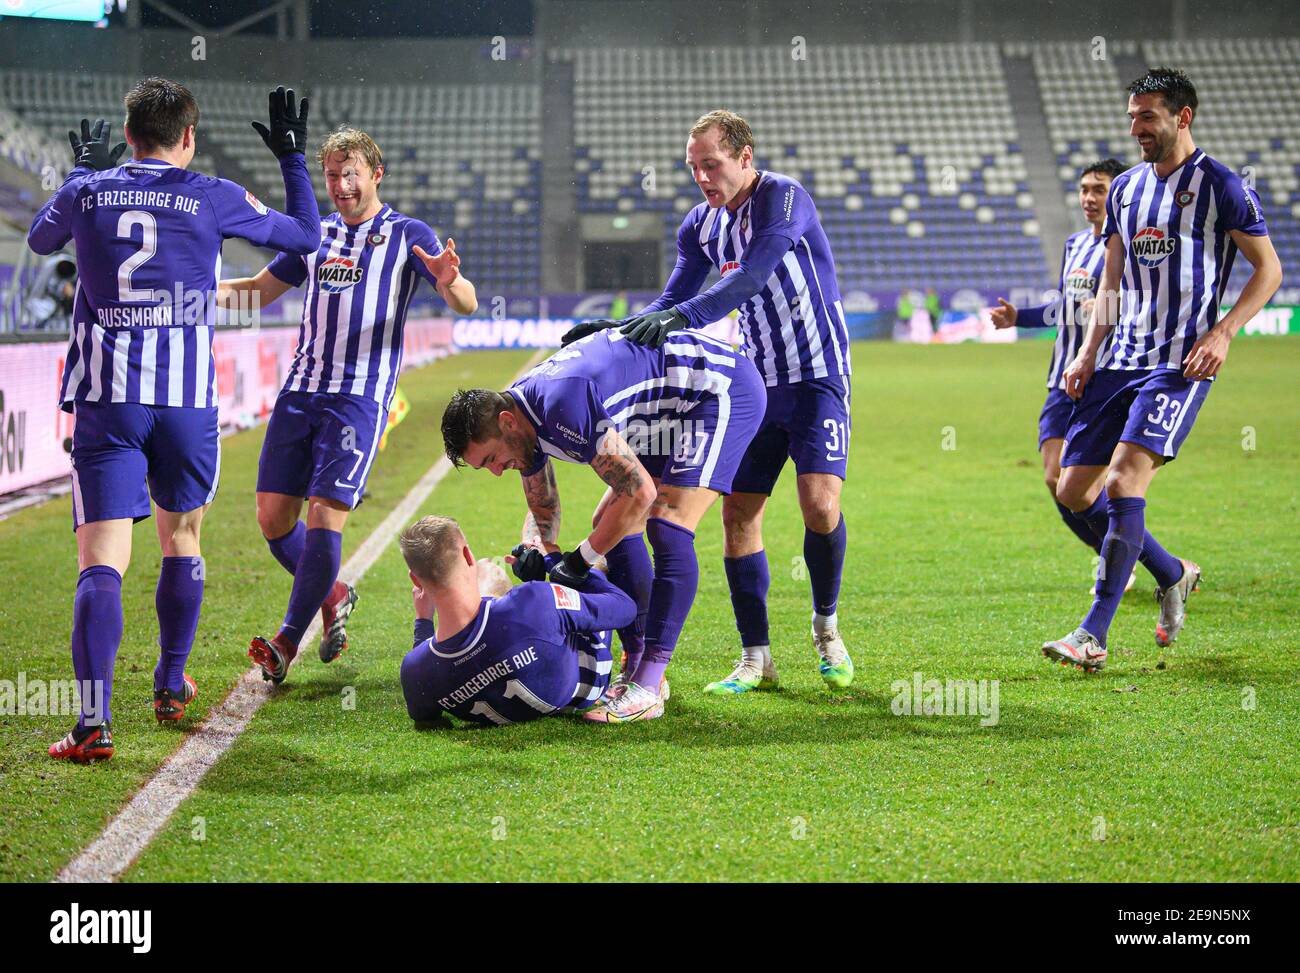 05 February 2021, Saxony, Aue: Football: 2. Bundesliga, FC Erzgebirge Aue - Hamburger SV, Matchday 20, at Erzgebirgsstadion. Aue's Florian Krüger (3rd from left) celebrates after his goal to make it 3-3 with Gaetan Bussmann (l-r), Jan Hochscheidt, Pascal Testroet, Ben Zolinski, John-Patrick Strauß and Ognjen Gnjatic. Photo: Robert Michael/dpa-Zentralbild/dpa - IMPORTANT NOTE: In accordance with the regulations of the DFL Deutsche Fußball Liga and/or the DFB Deutscher Fußball-Bund, it is prohibited to use or have used photographs taken in the stadium and/or of the match in the form of sequence Stock Photo